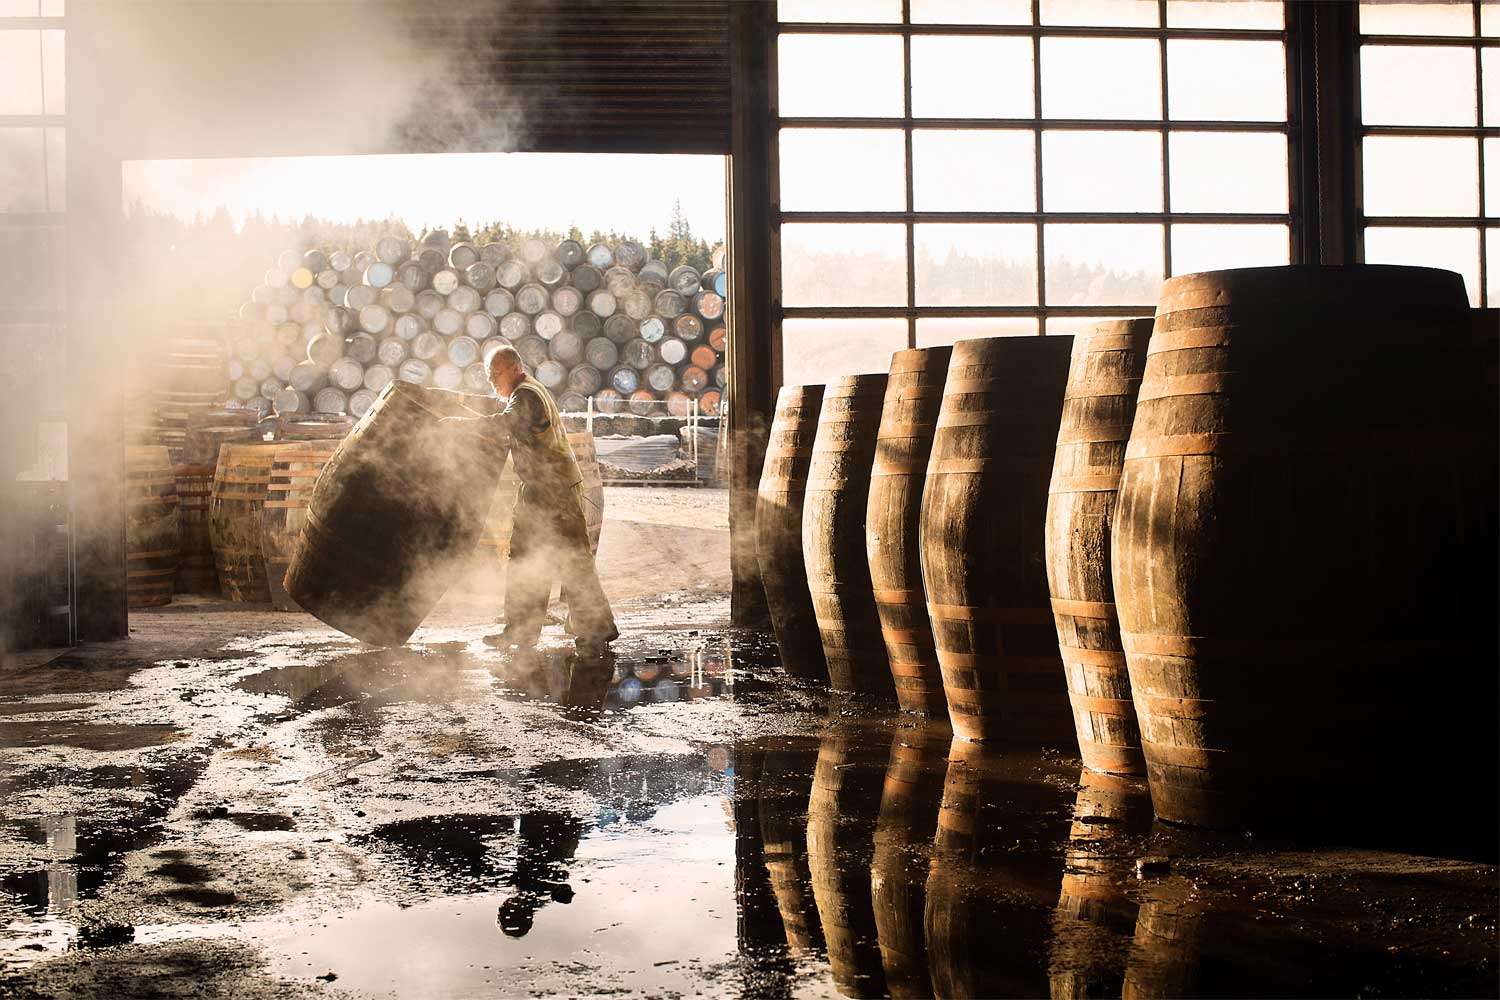 A worker rolls a cask at the speyside cooperage, a stopping point on the scottish whisky tour with Turas Travel